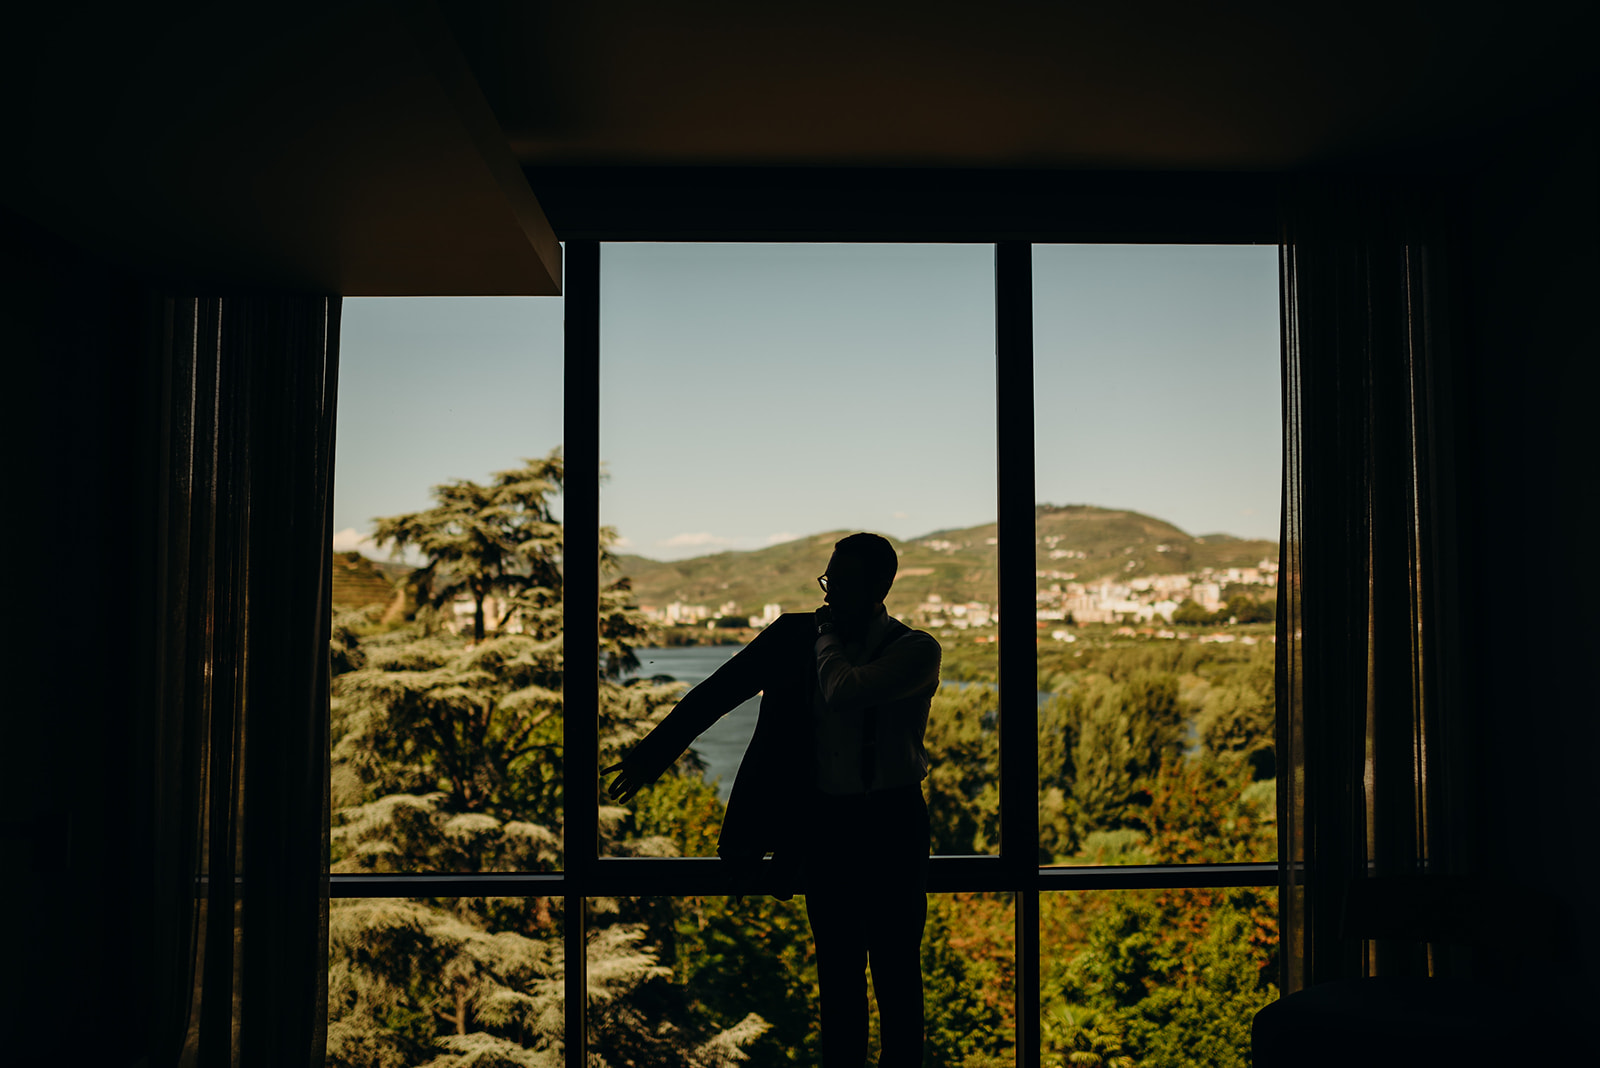 Groom gets ready silhouetted by window